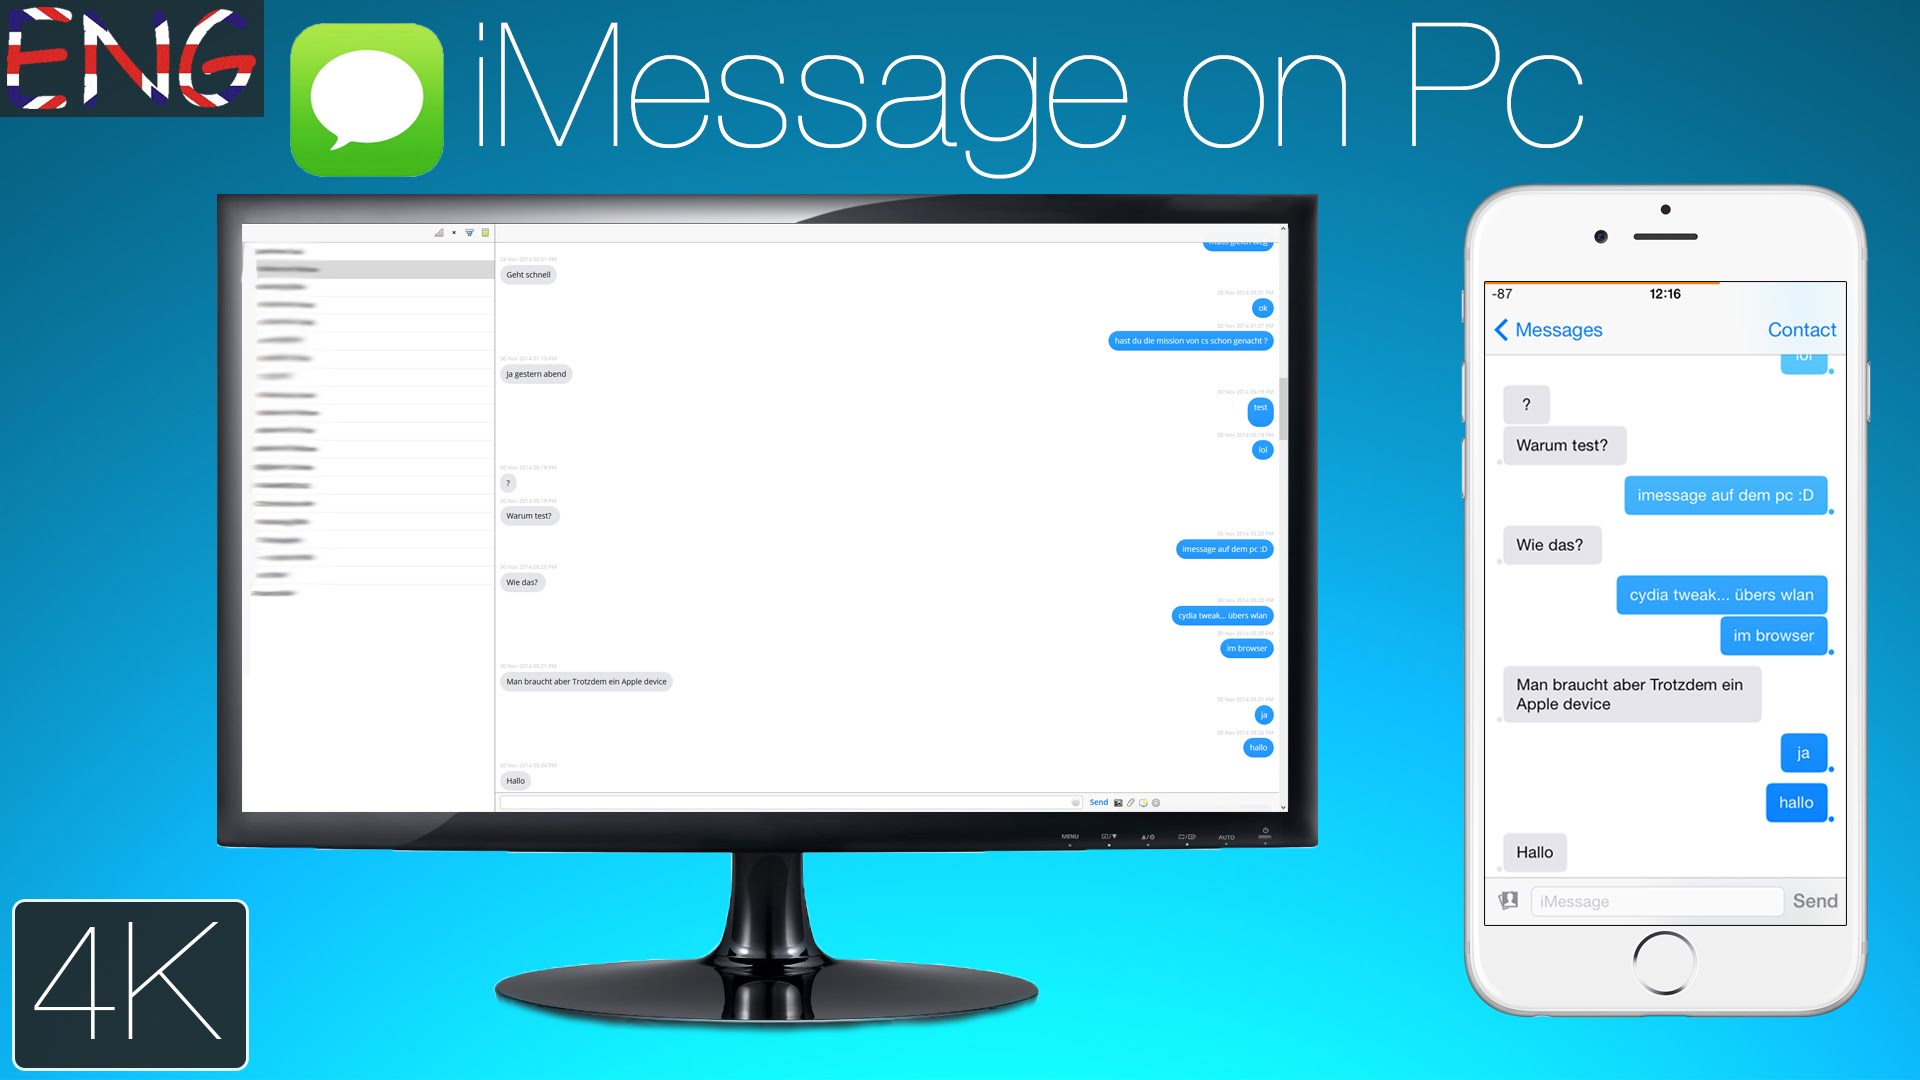 can you get imessage on windows